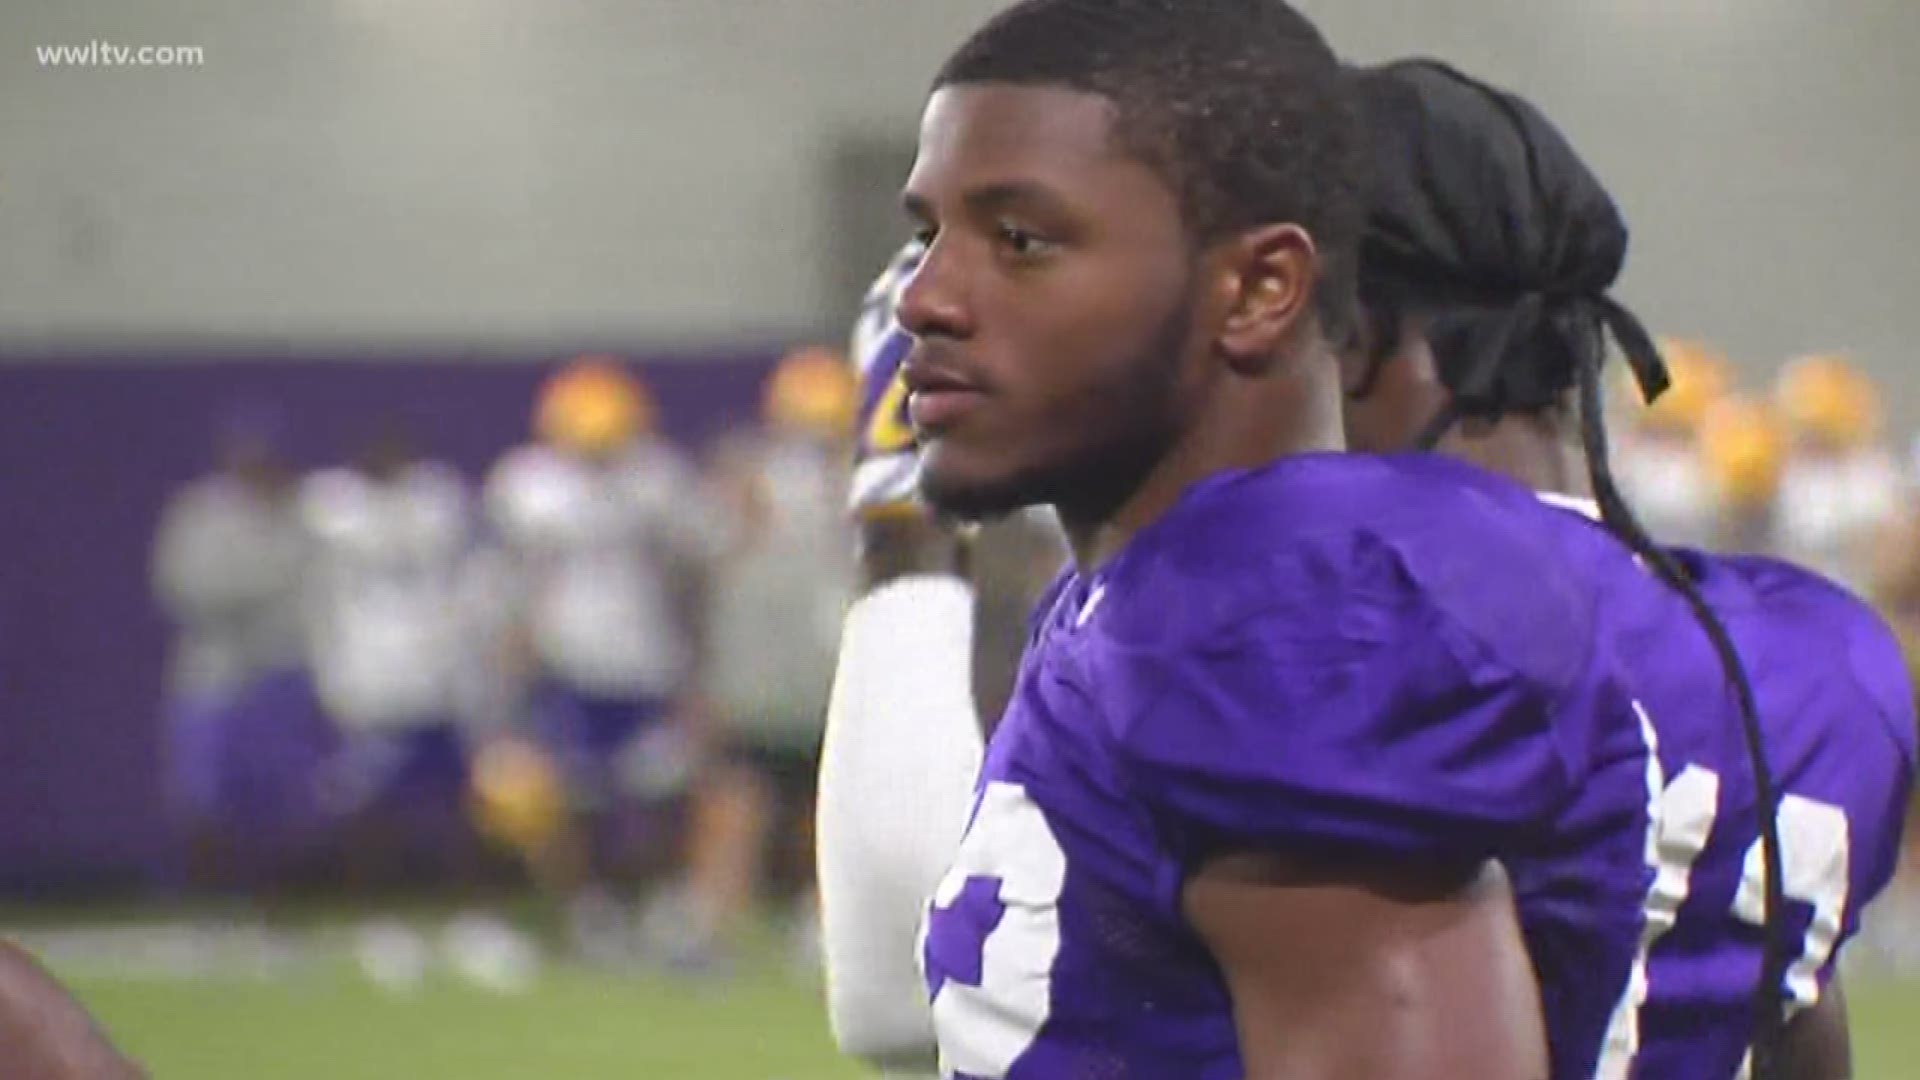 "We're not done yet," Donald Jackson, the attorney for Kristian Fulton said on Aug. 9 after losing an NCAA appeal to shorten the LSU cornerback's two-year sentence by a year.